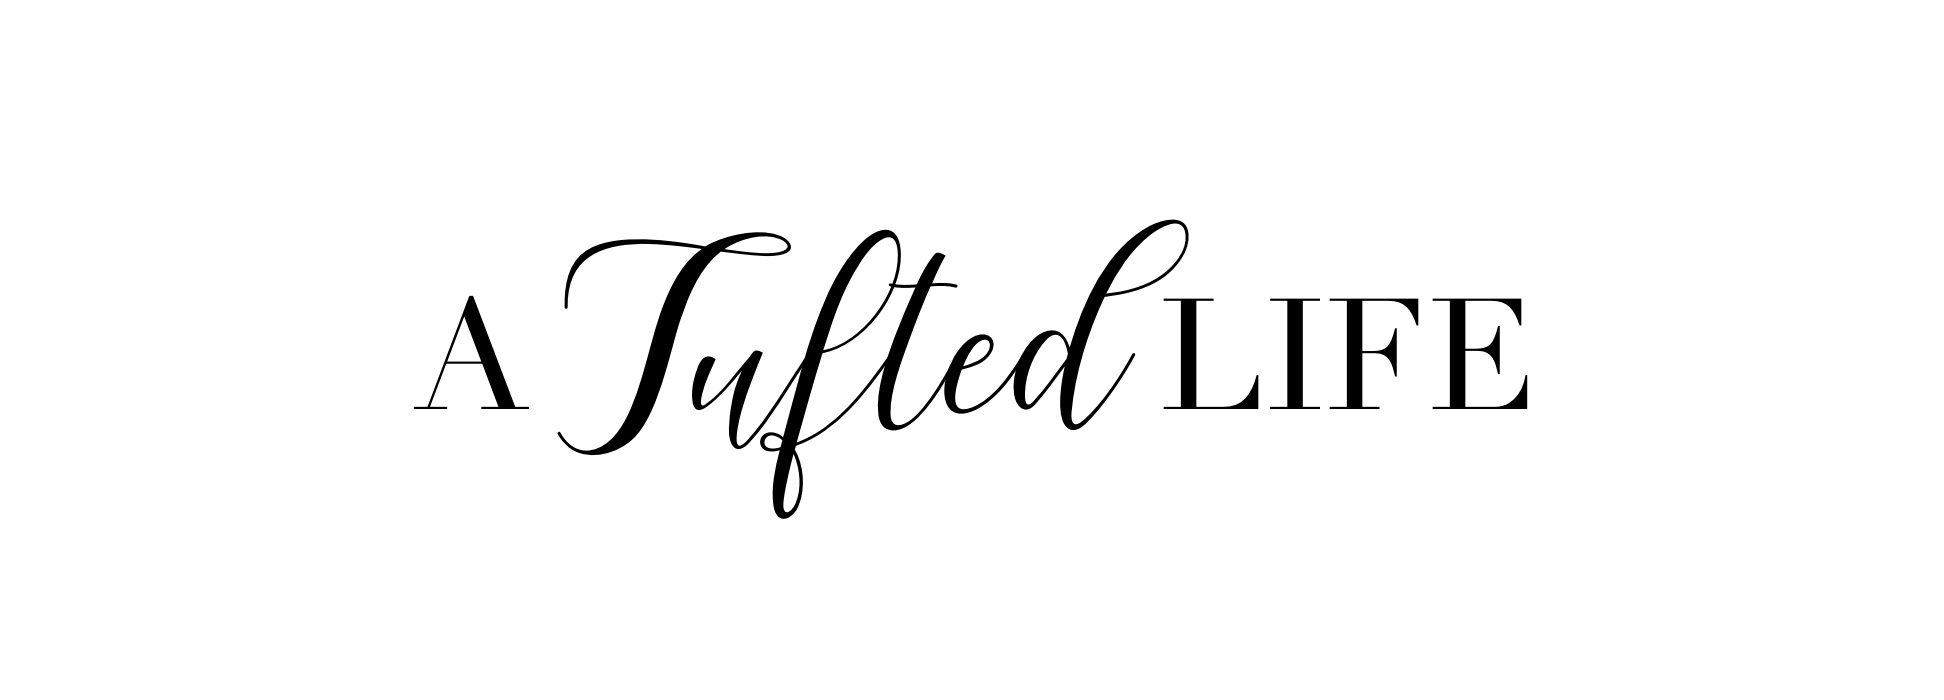 A Tufted Life